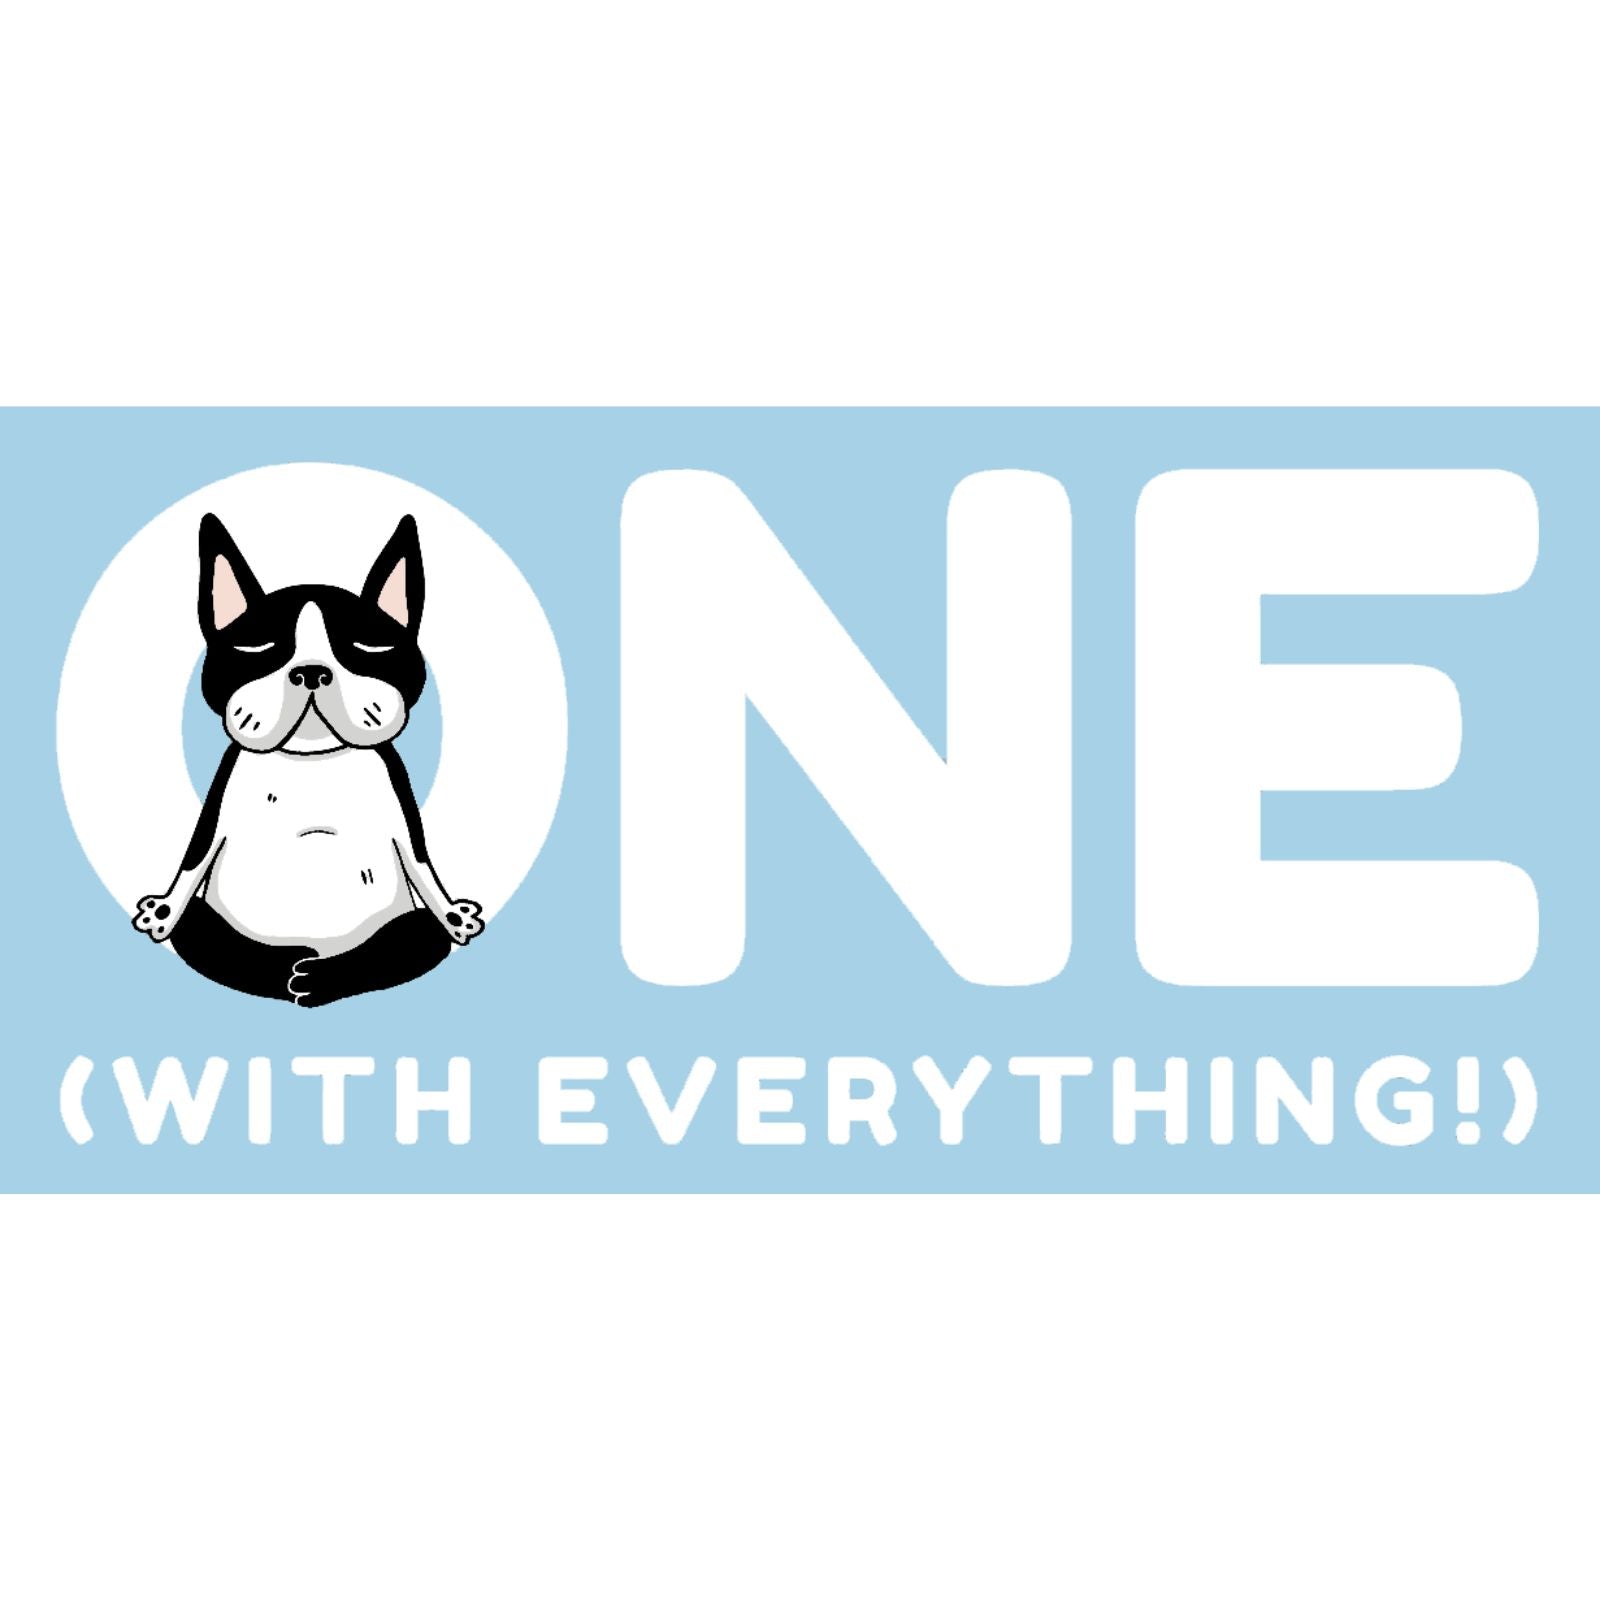 ONE With Everything Dog Treats logo featuring a dog and the brand name in bold, friendly lettering.